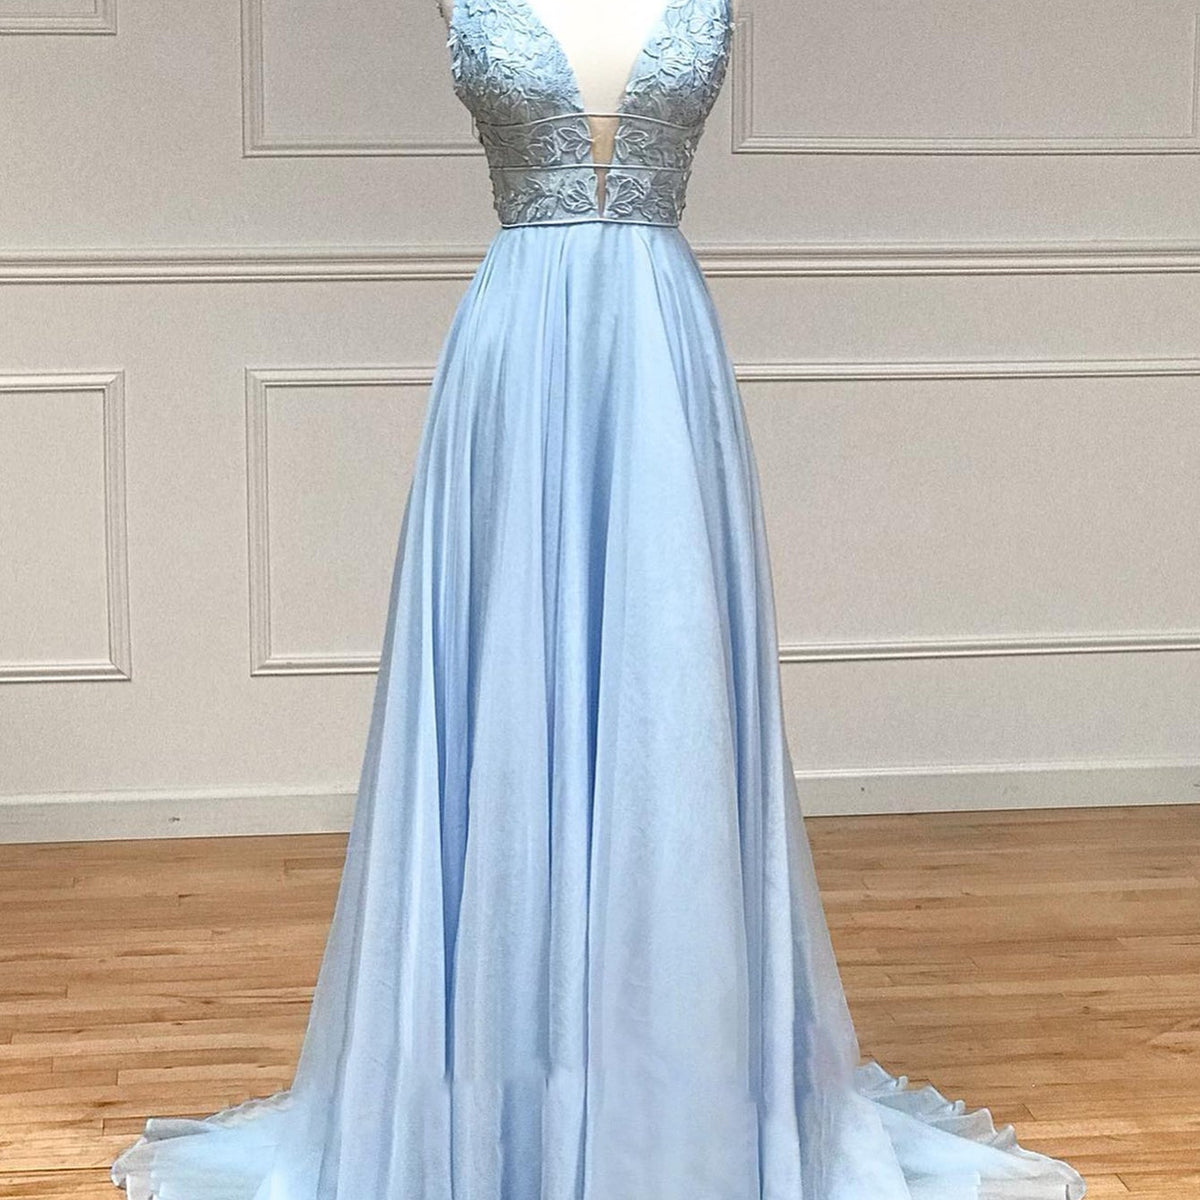 KissProm Veronica A Line Ink Blue Glitter Tulle Lace Prom Dress with Lace Up Back Ink Blue / 2